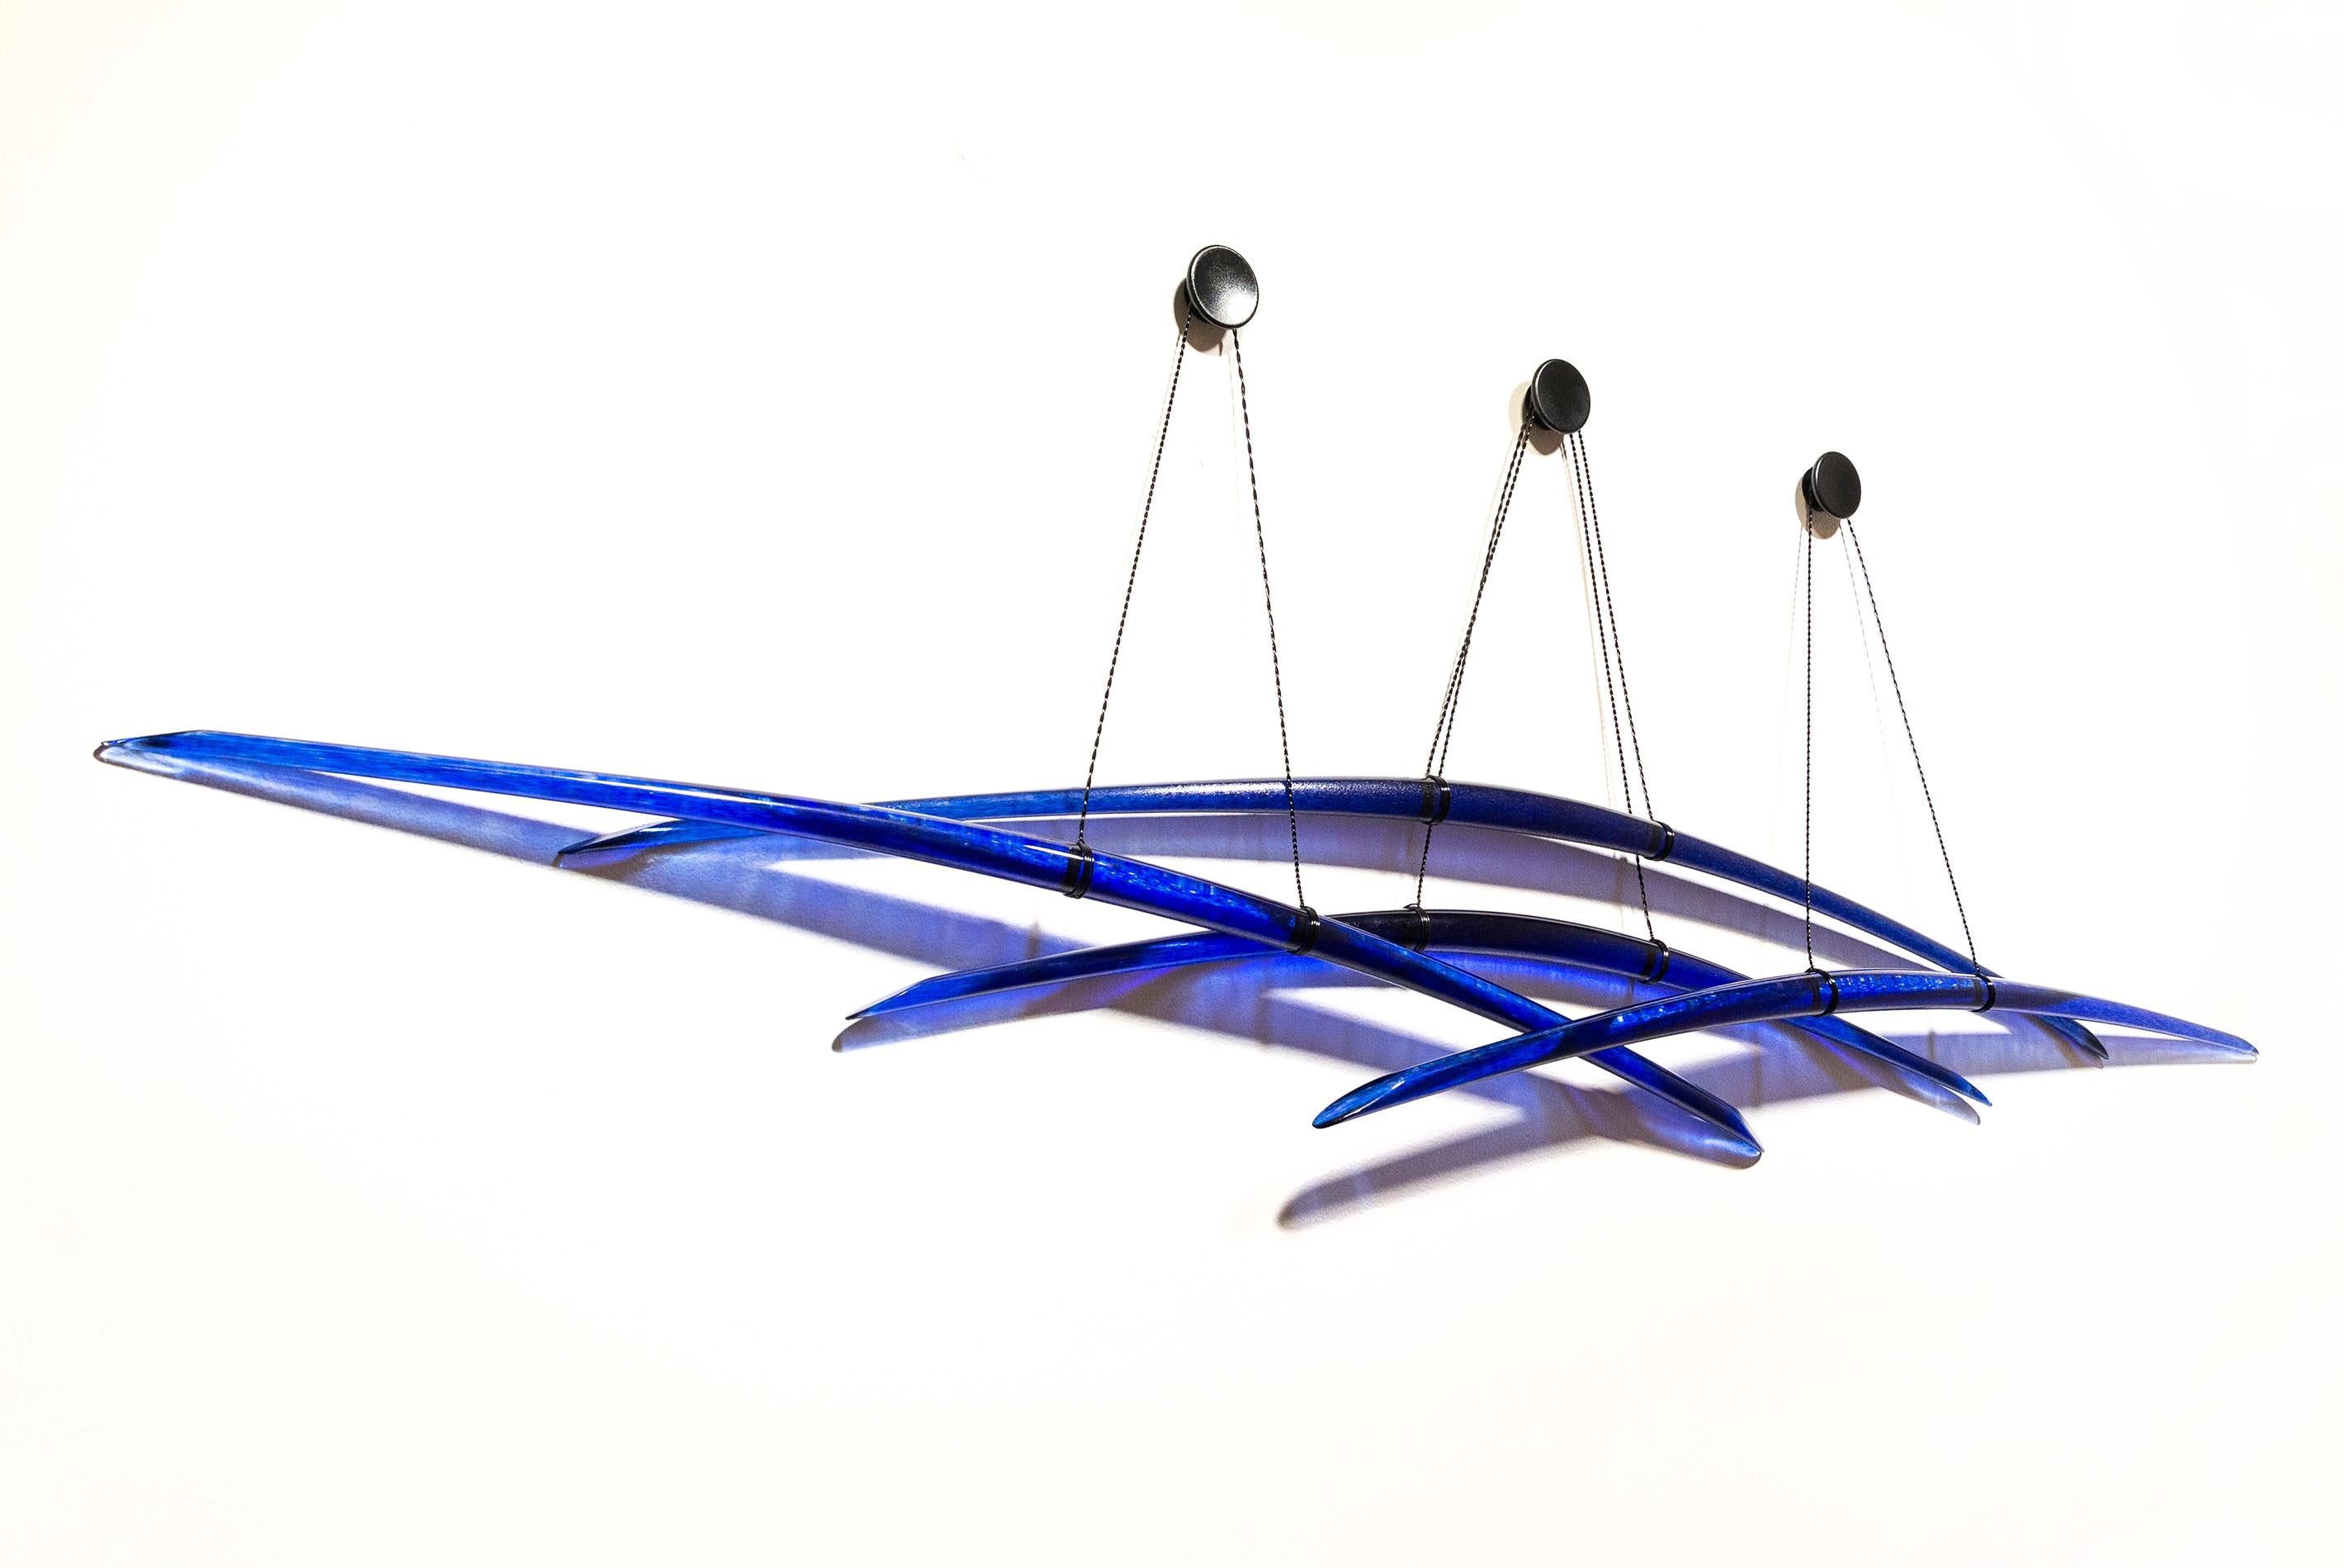 Probability Deep Blue 3 - curved, abstract, glass, elegant wall sculpture - Sculpture by John Paul Robinson